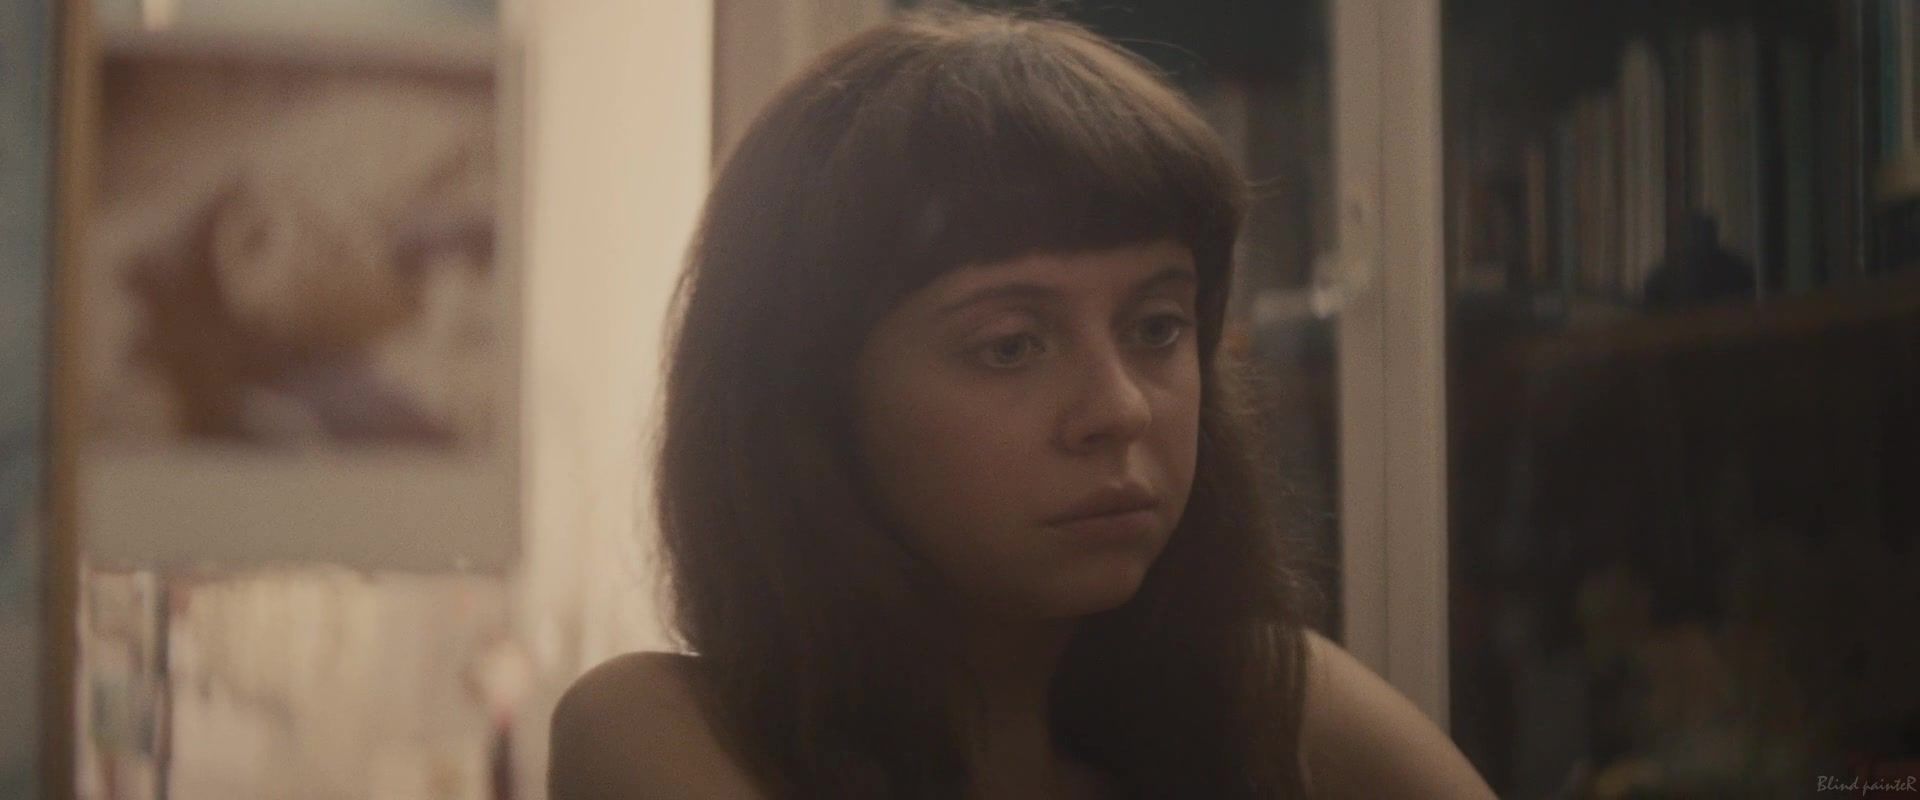 Soft Full Frontal and sex video | Celebrity Bel Powley nude from the movie "The Diary Of A Teenage Girl" (2015) HellXX